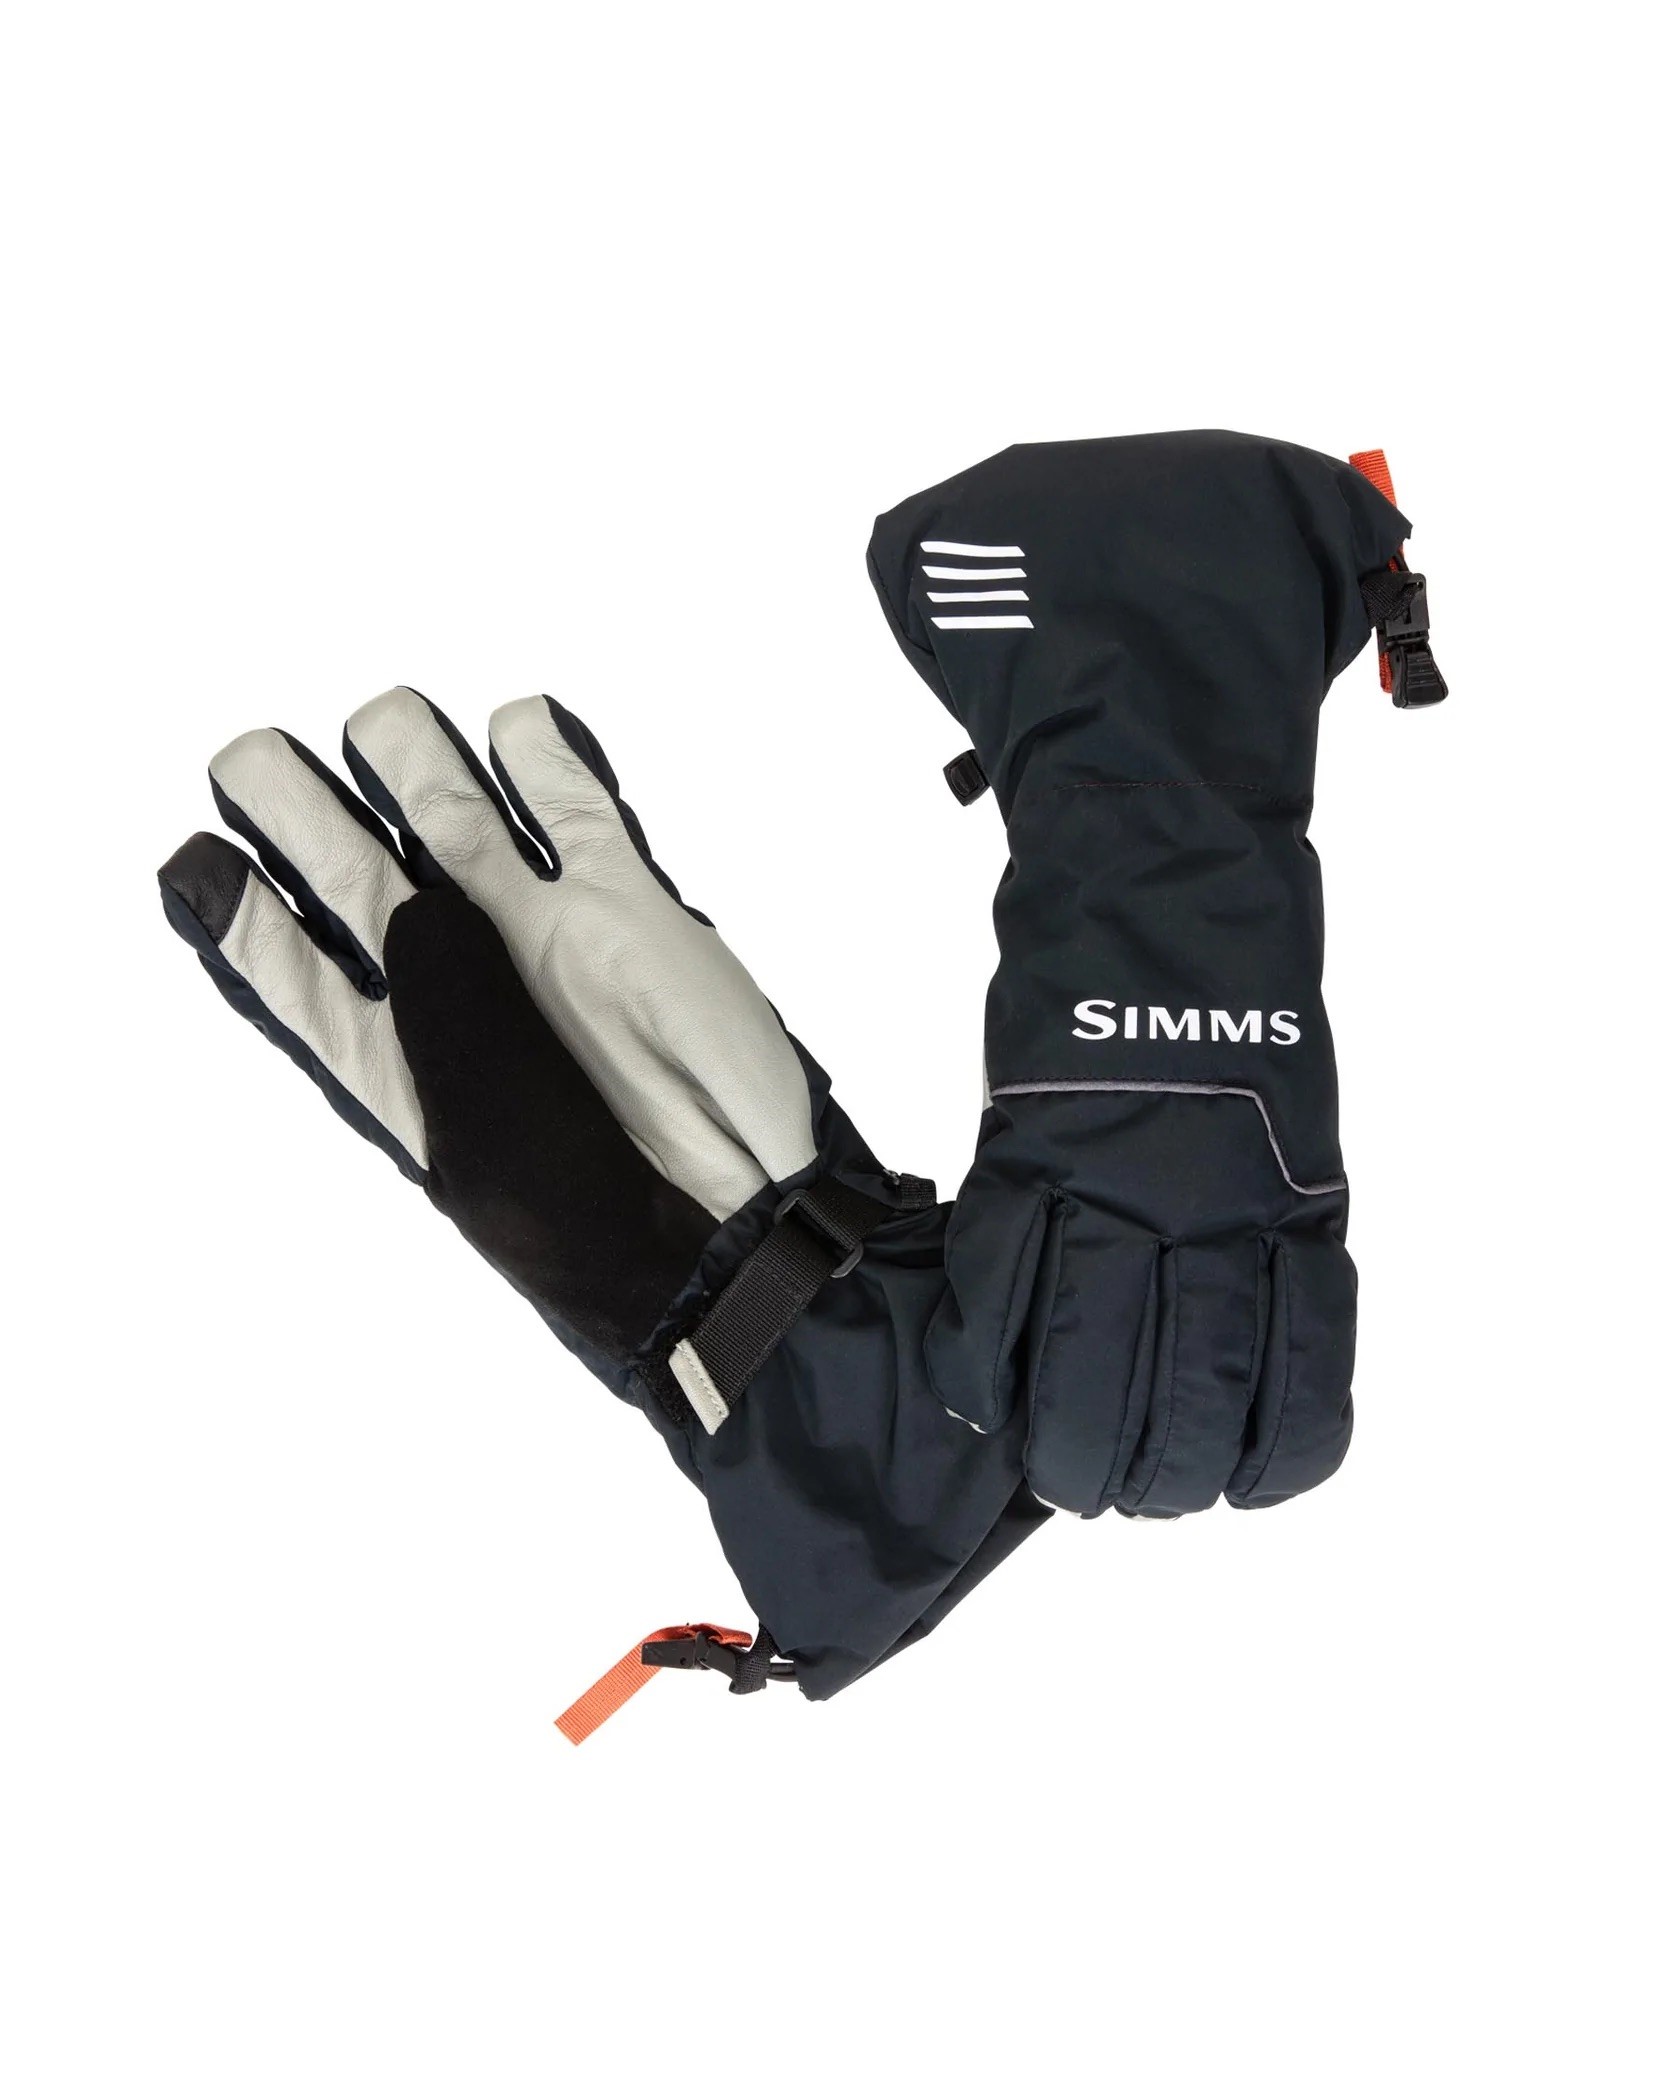 Simms Challenger Insulated Glove - Black - Small